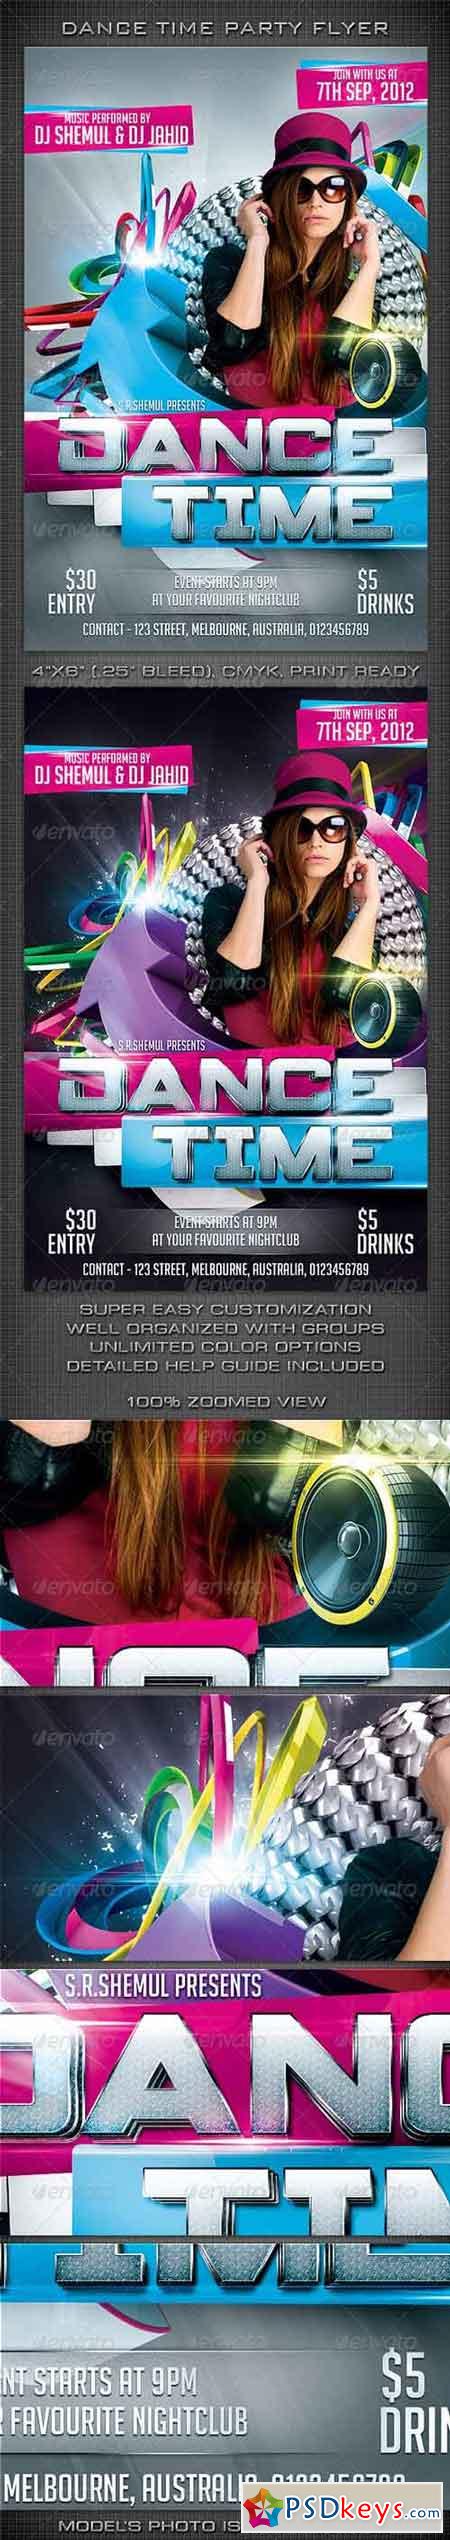 Dance Time Flyer Template 2937741